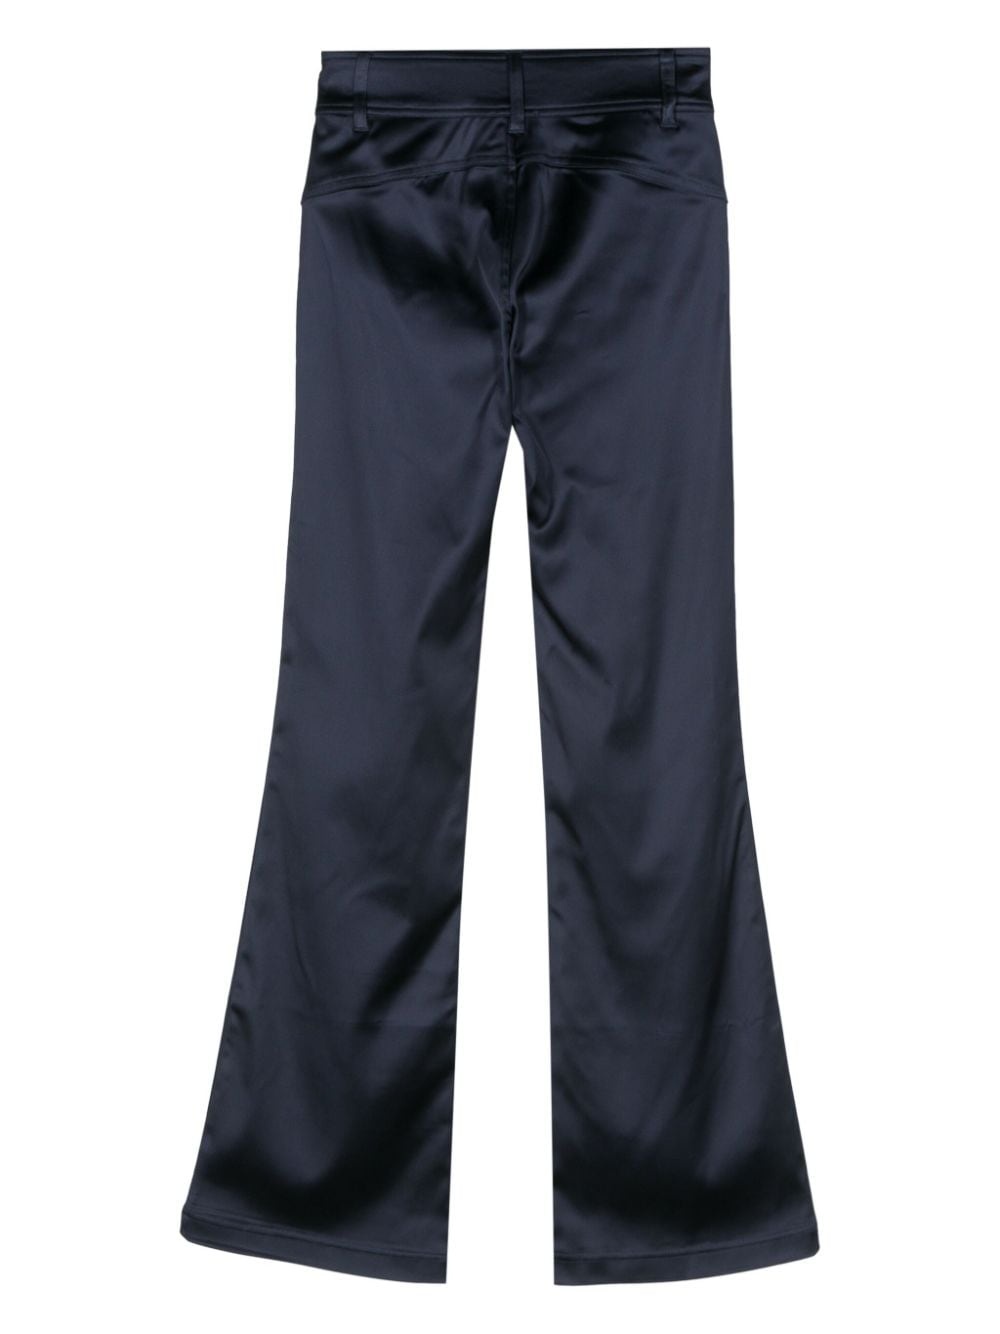 P-stell flared trousers - 2